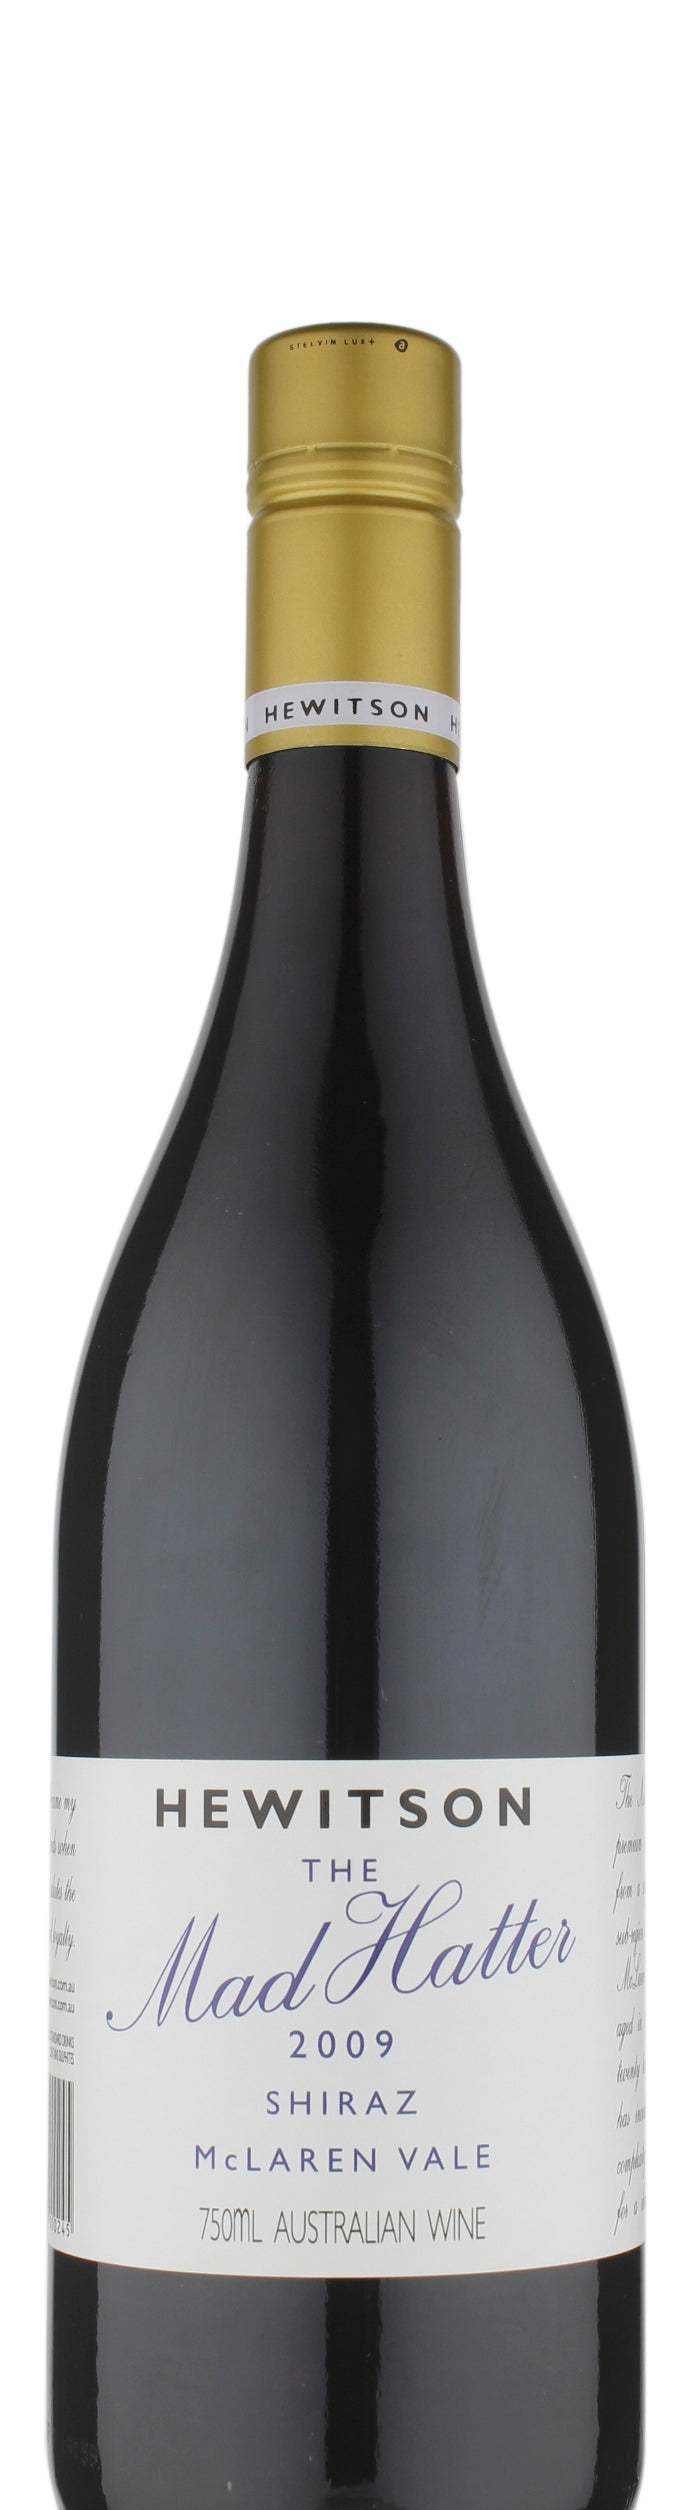 Hewitson The Mad Hatter Shiraz 2009